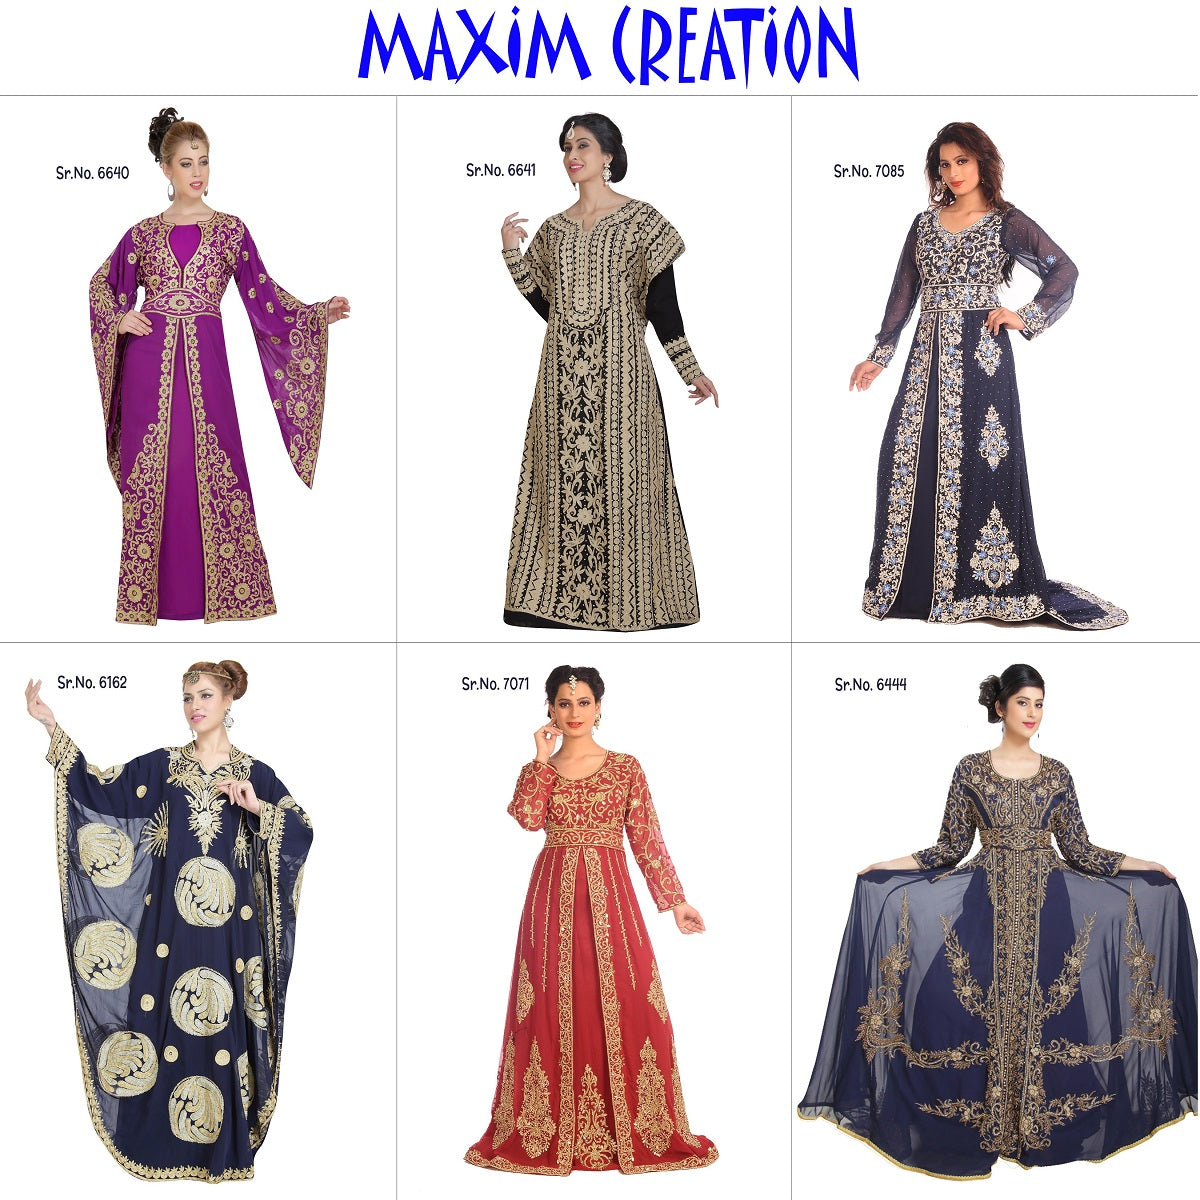 Load image into Gallery viewer, Printed Dubai Kaftan With Mix Embroidered Beads - Maxim Creation
